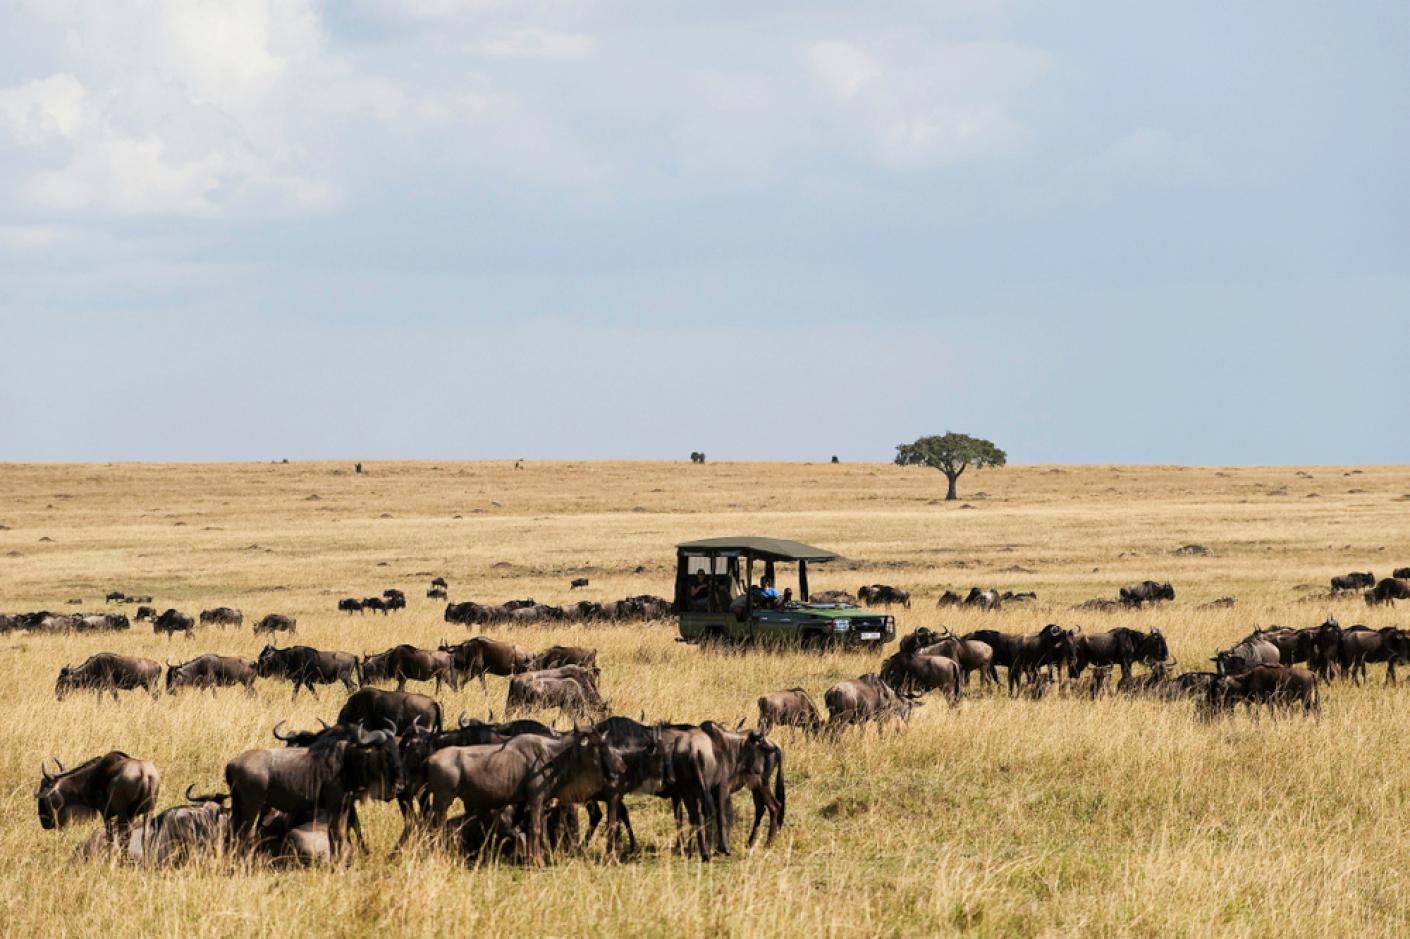 Amazing 8 Things to Do in Masai Mara National Reserve